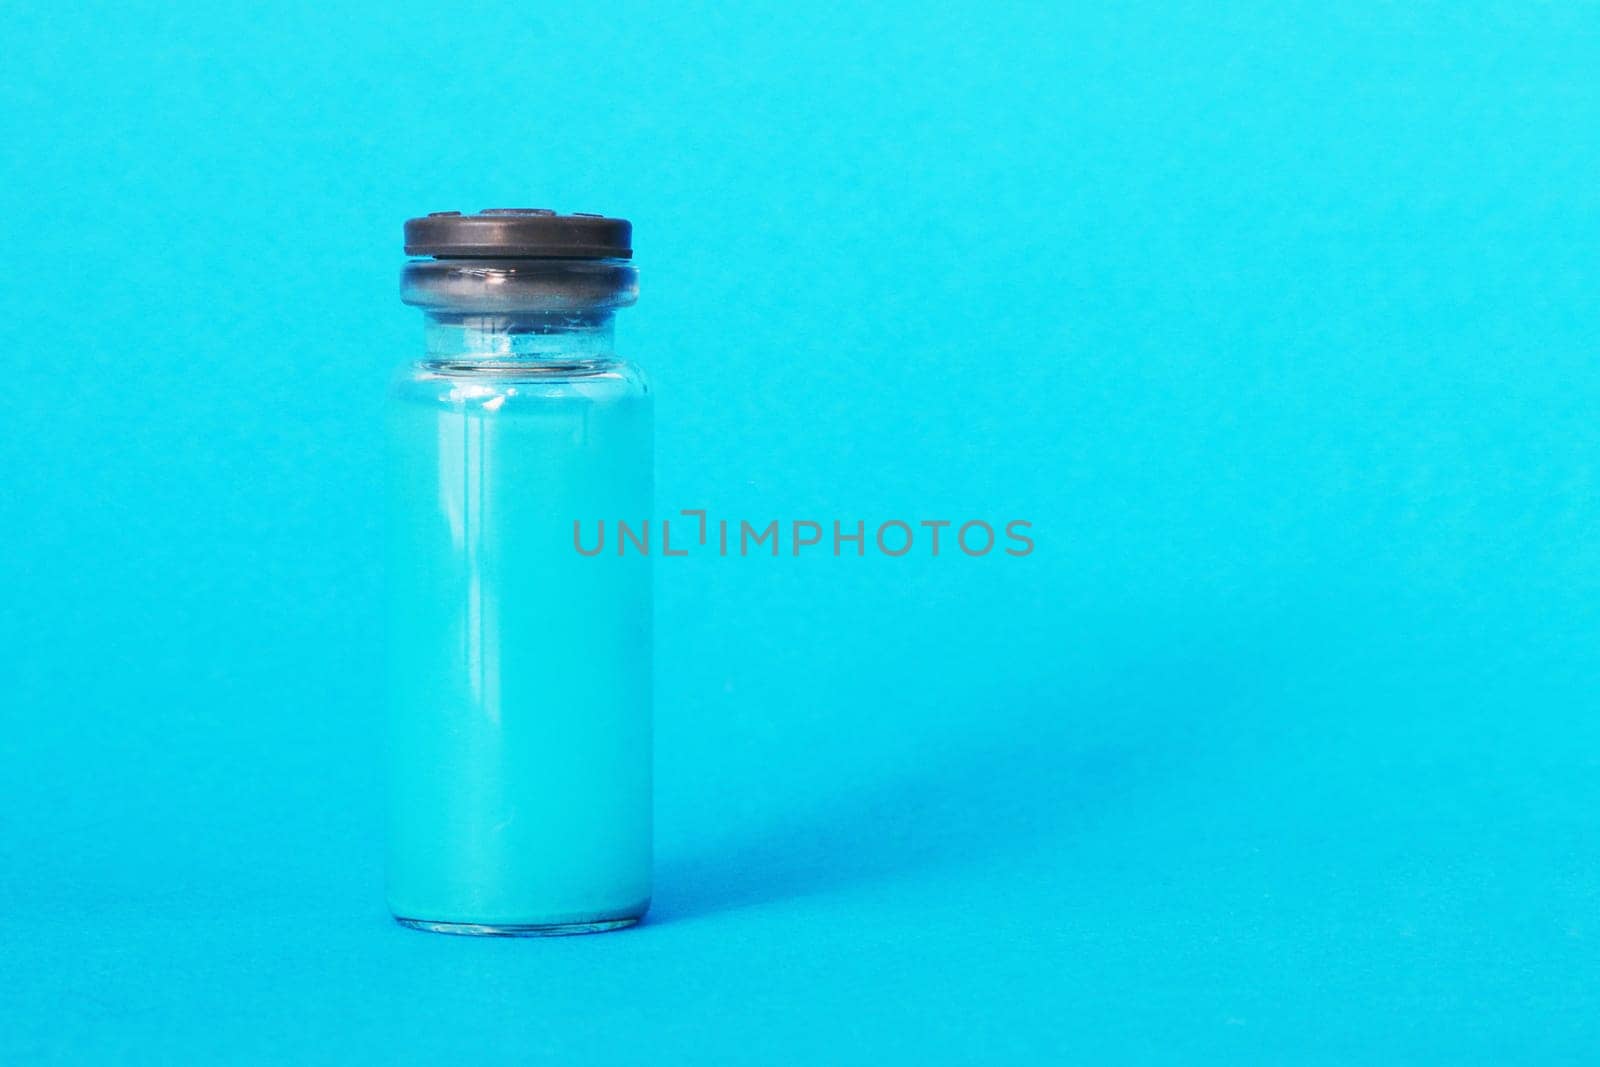 A bottle with a blue chemical reagent for research on a blue background.